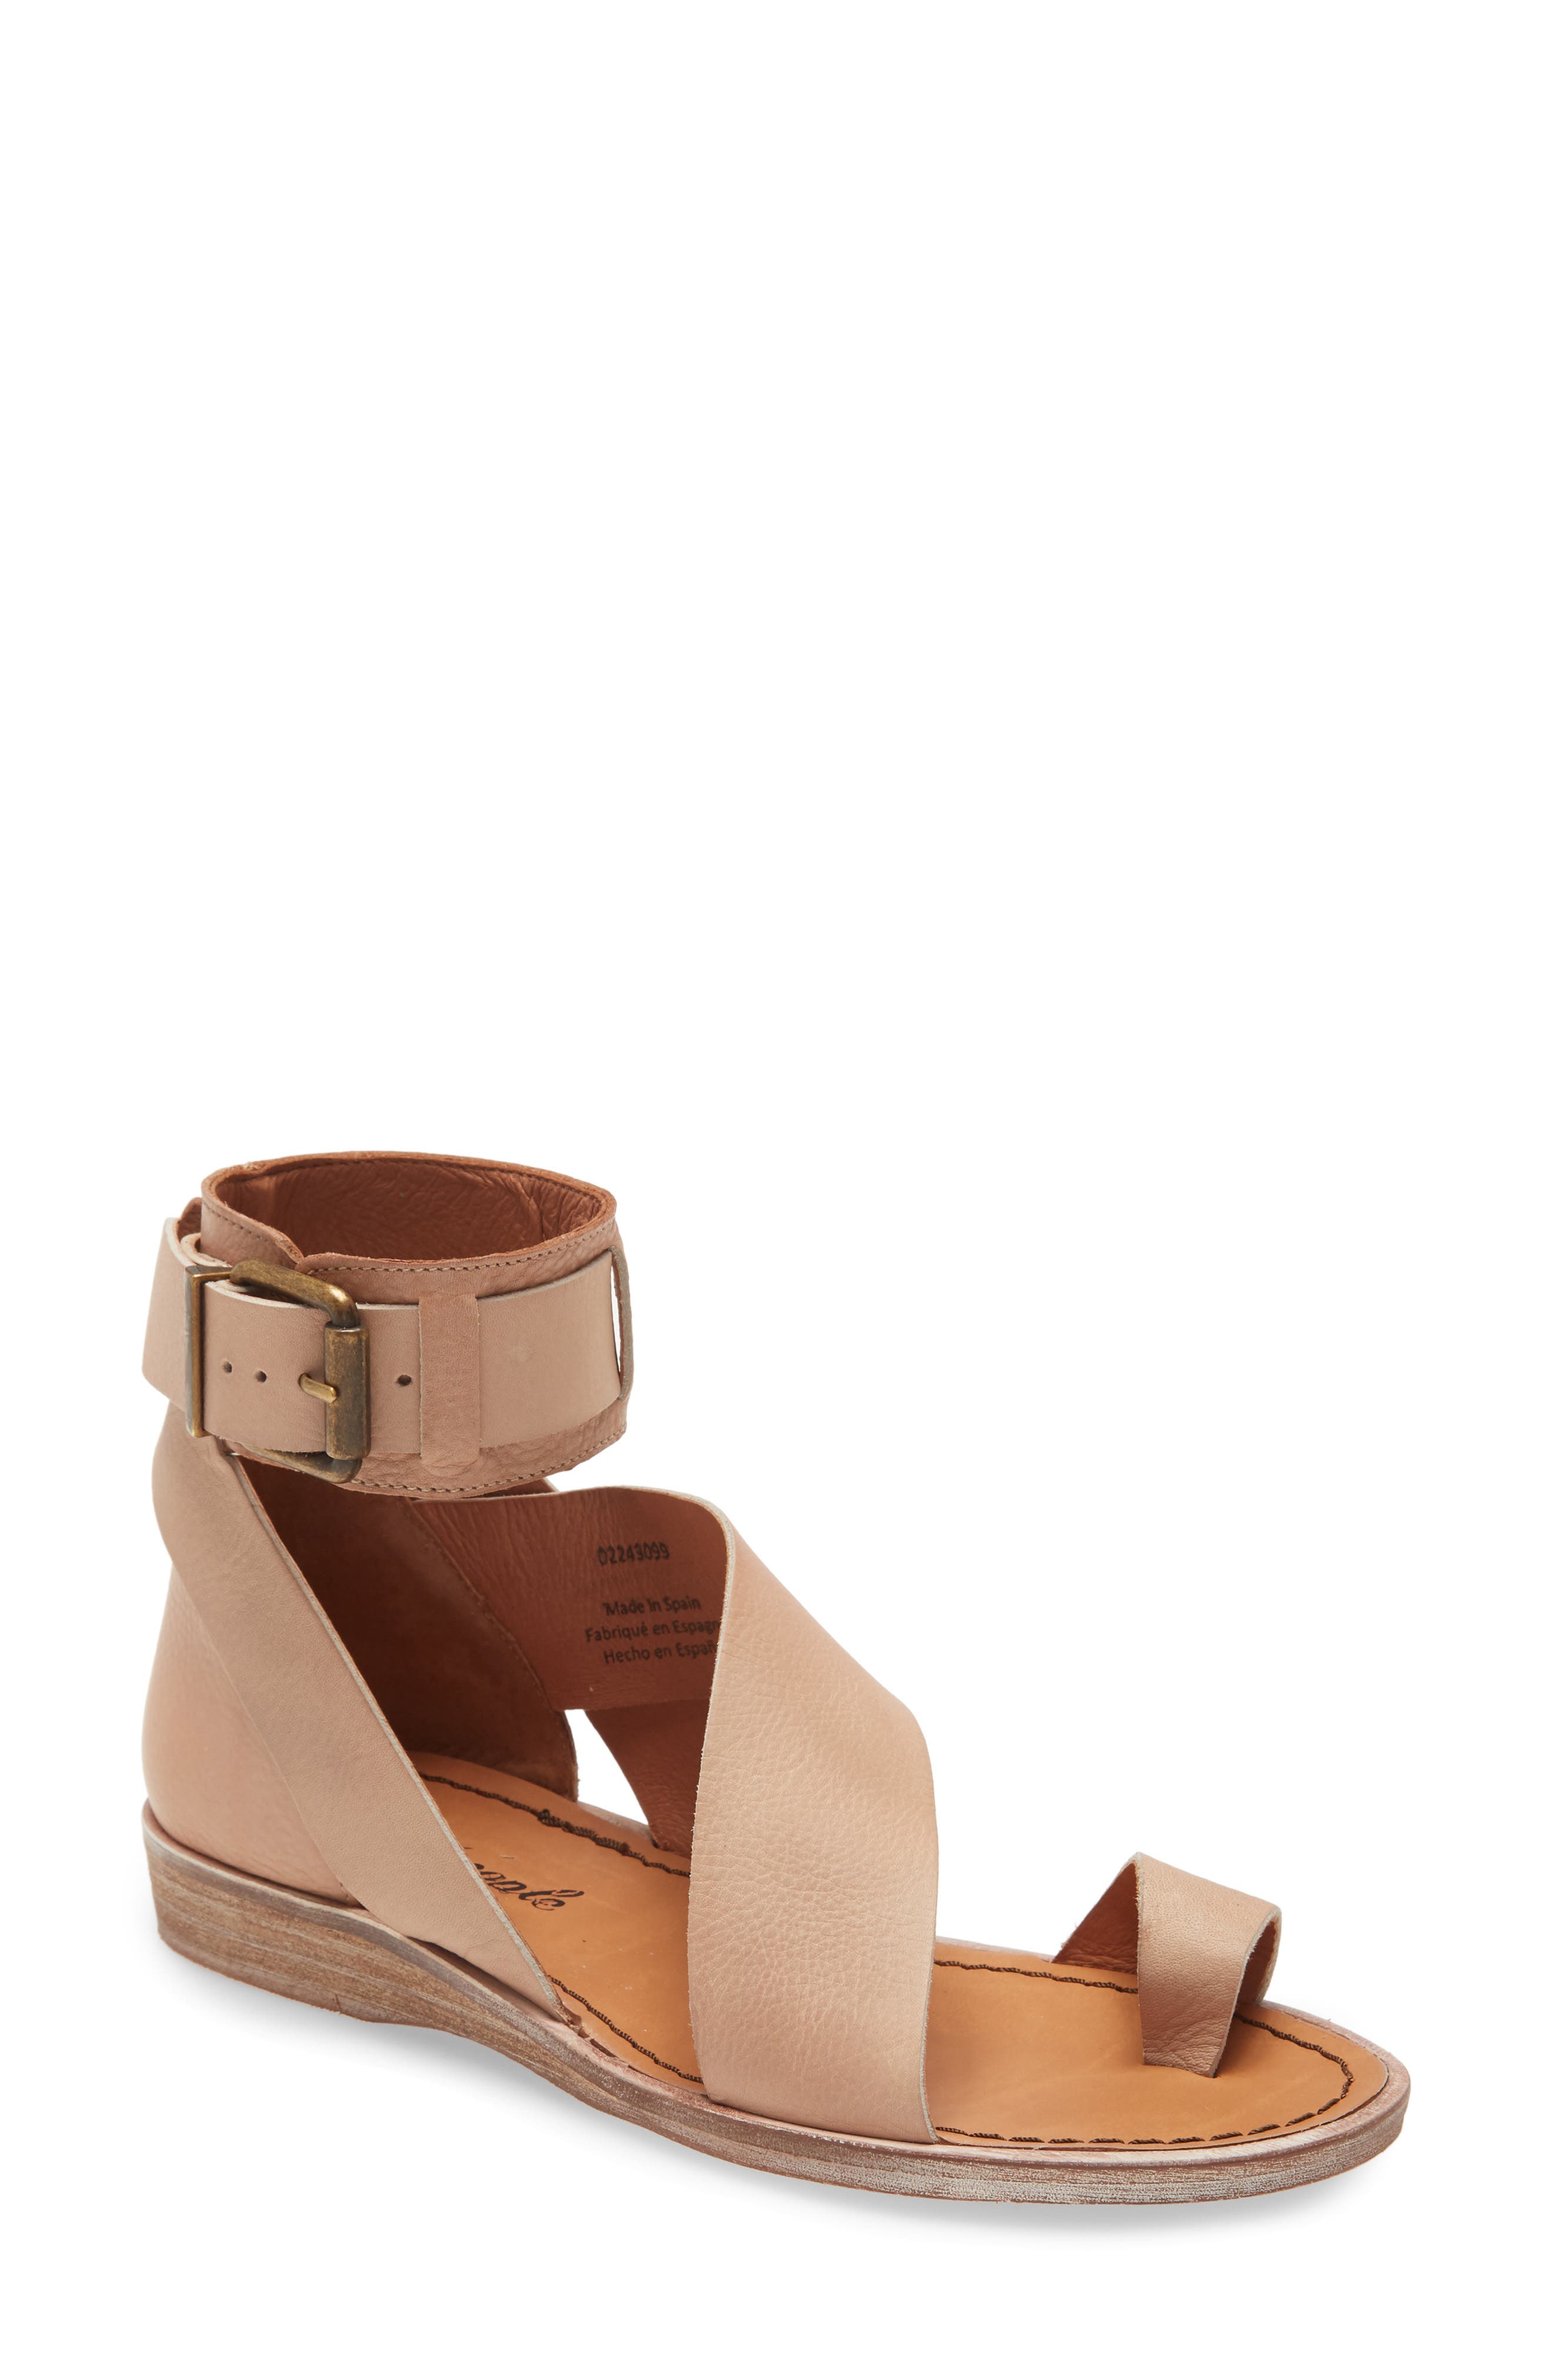 free people shoes nordstrom